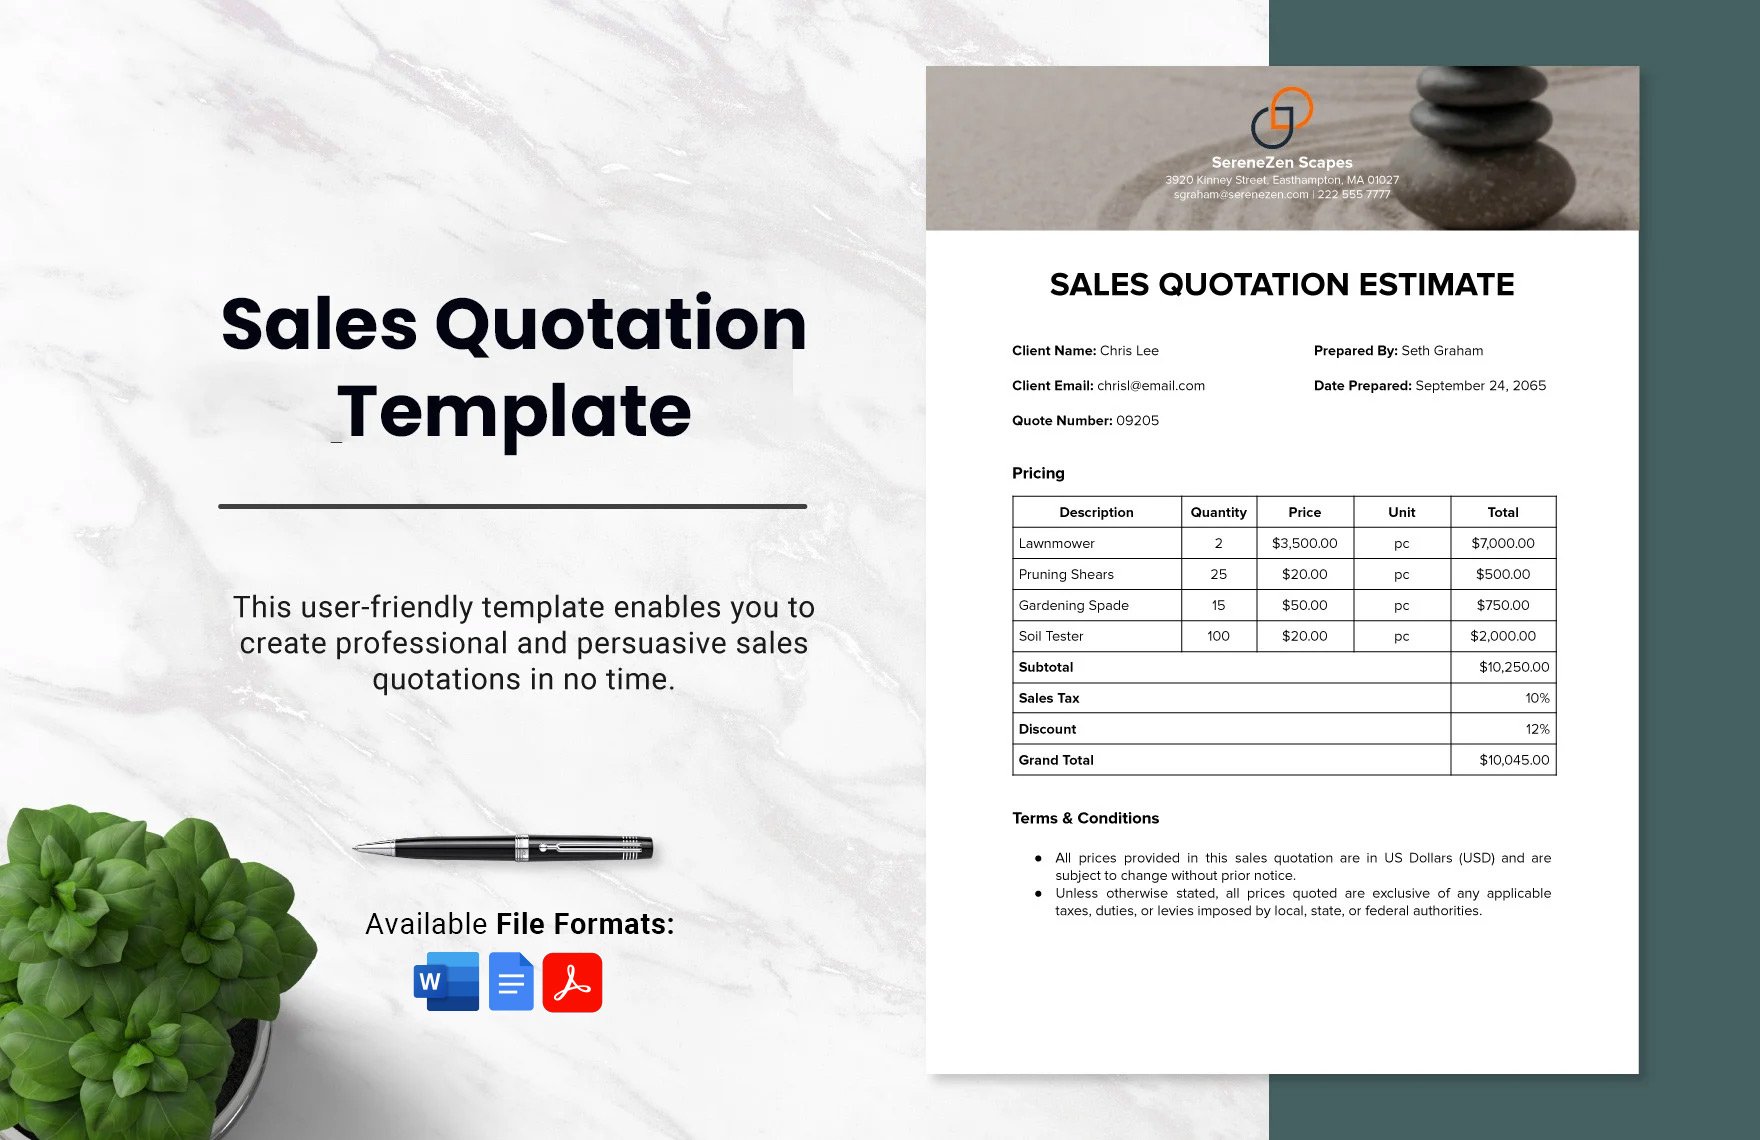 Sales Quotation Template in Word, Google Docs, PDF